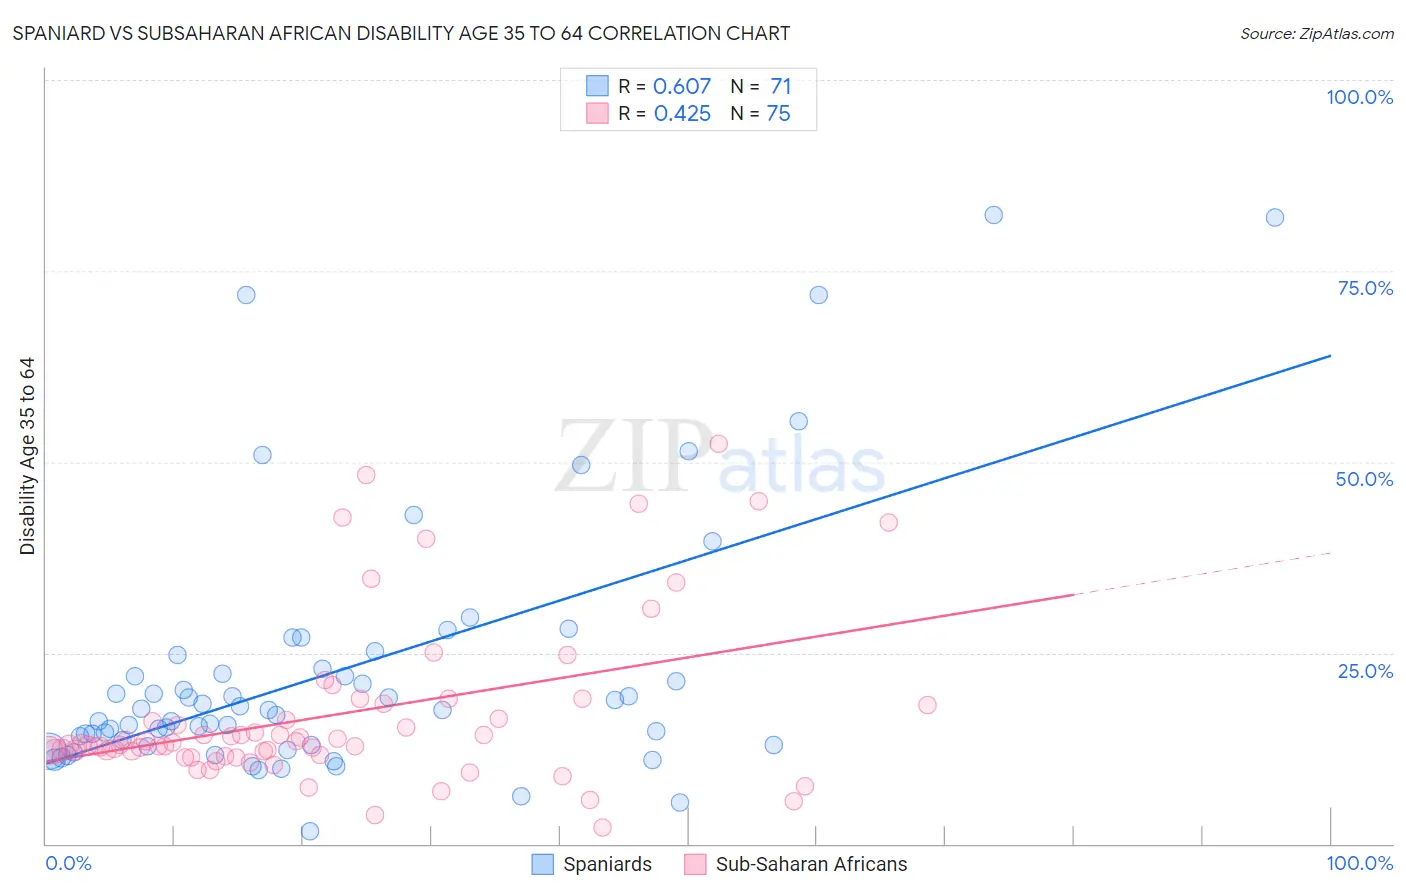 Spaniard vs Subsaharan African Disability Age 35 to 64